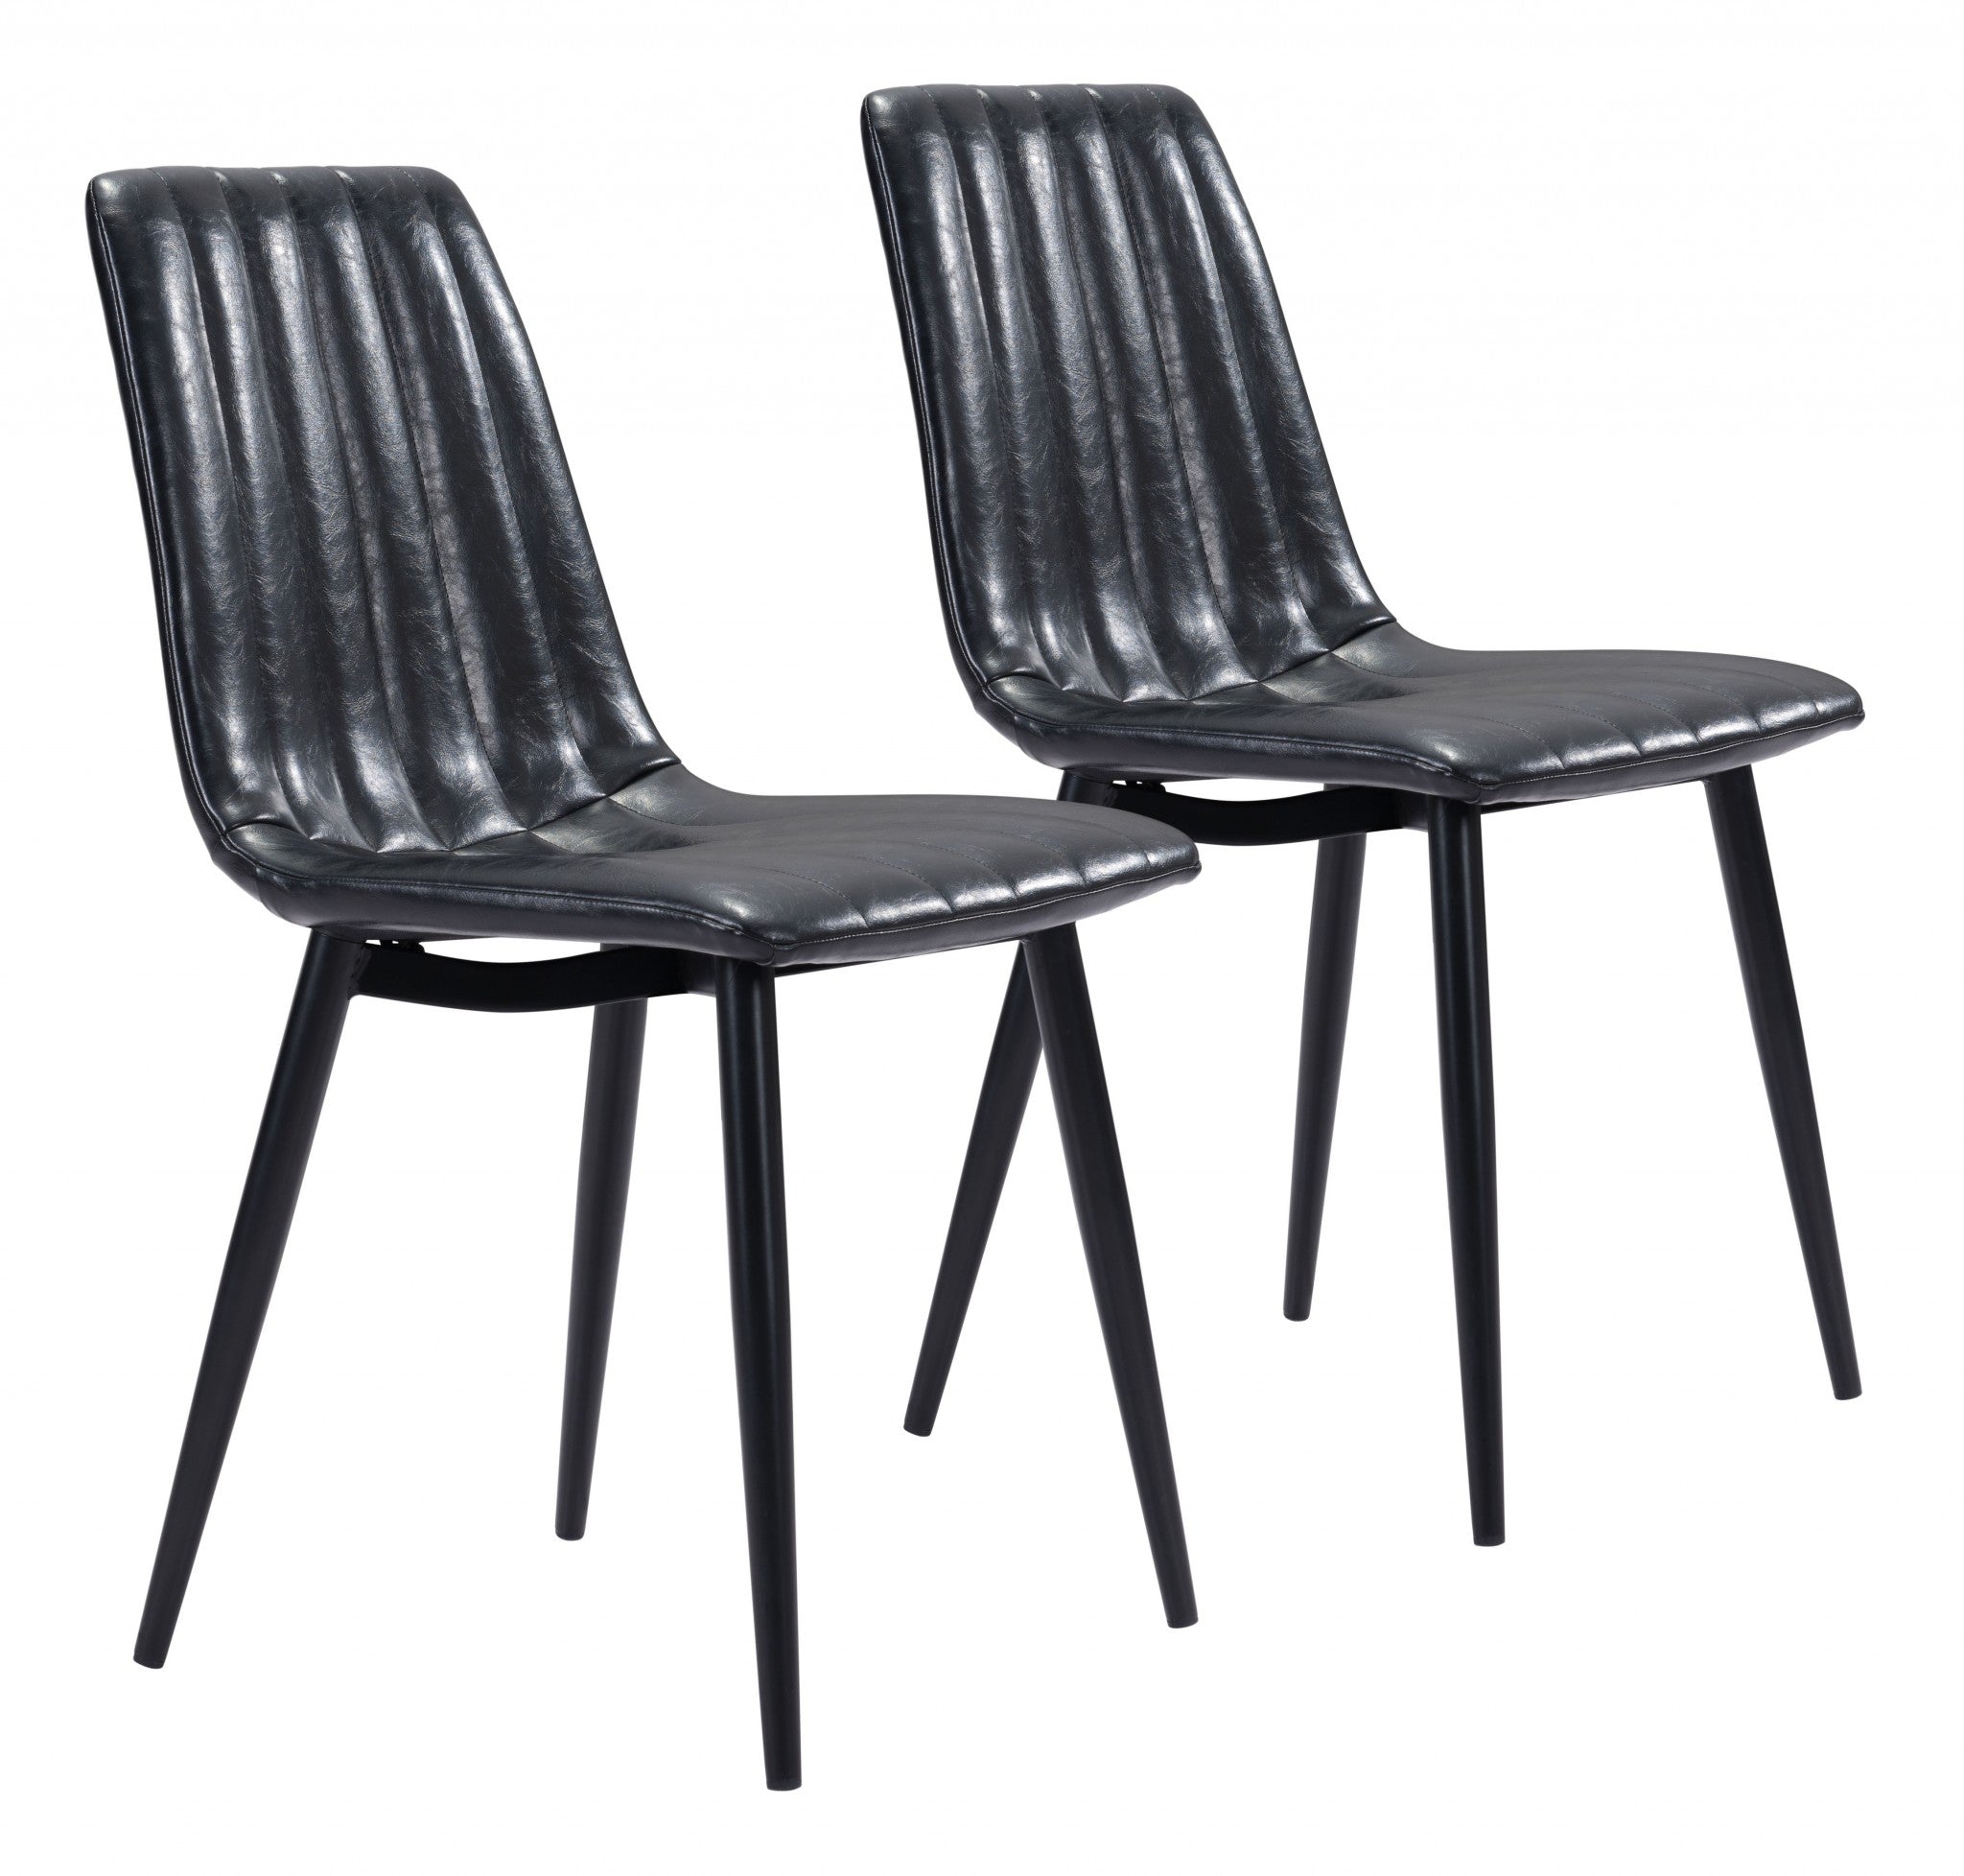 Set of Two Black Faux Leather Channel Scoop Dining Chairs